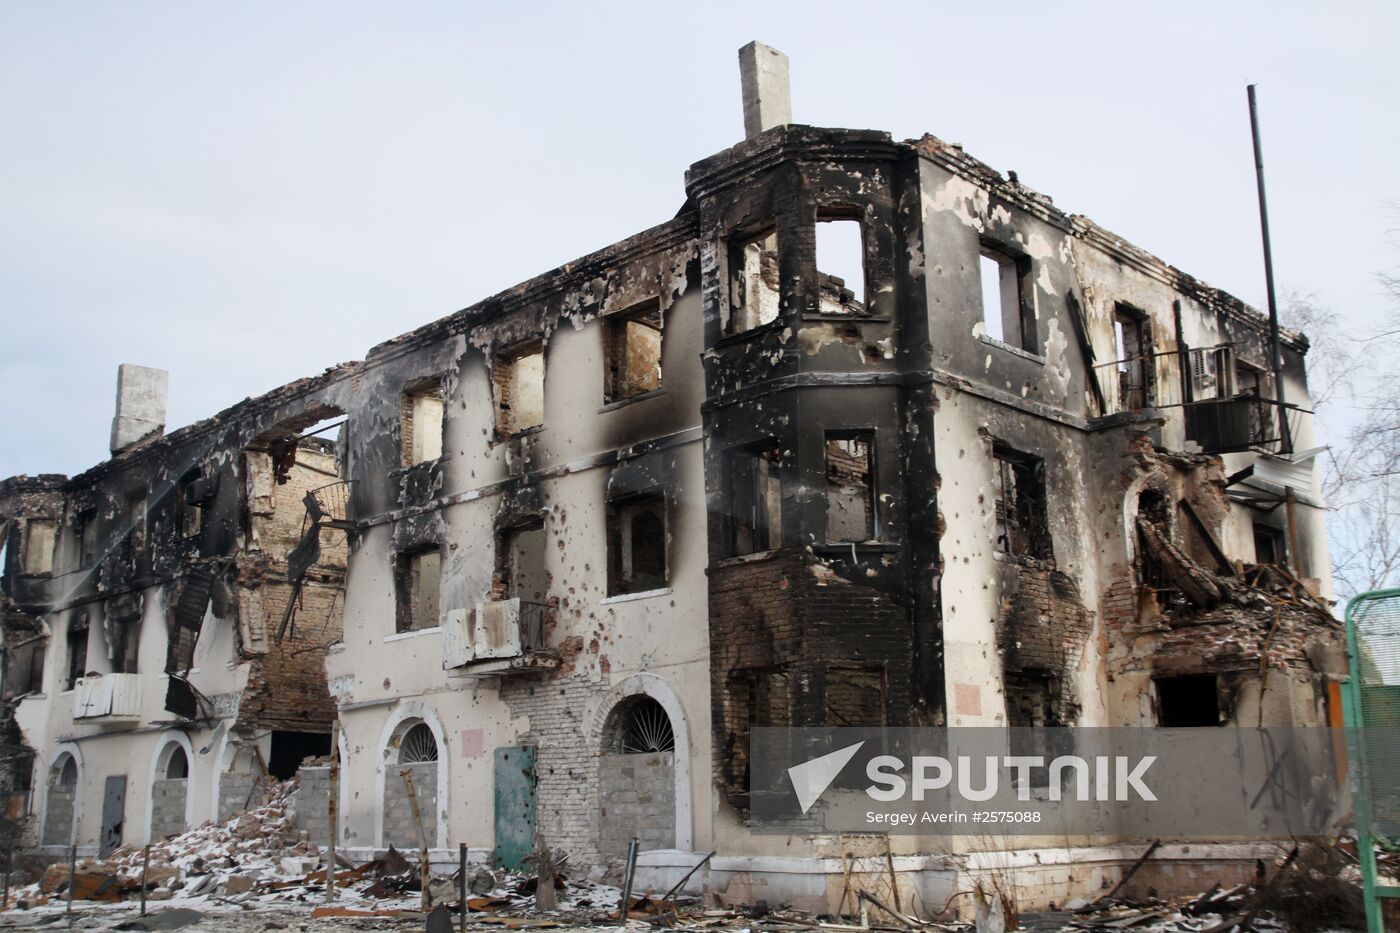 Situation in Uhlehorsk